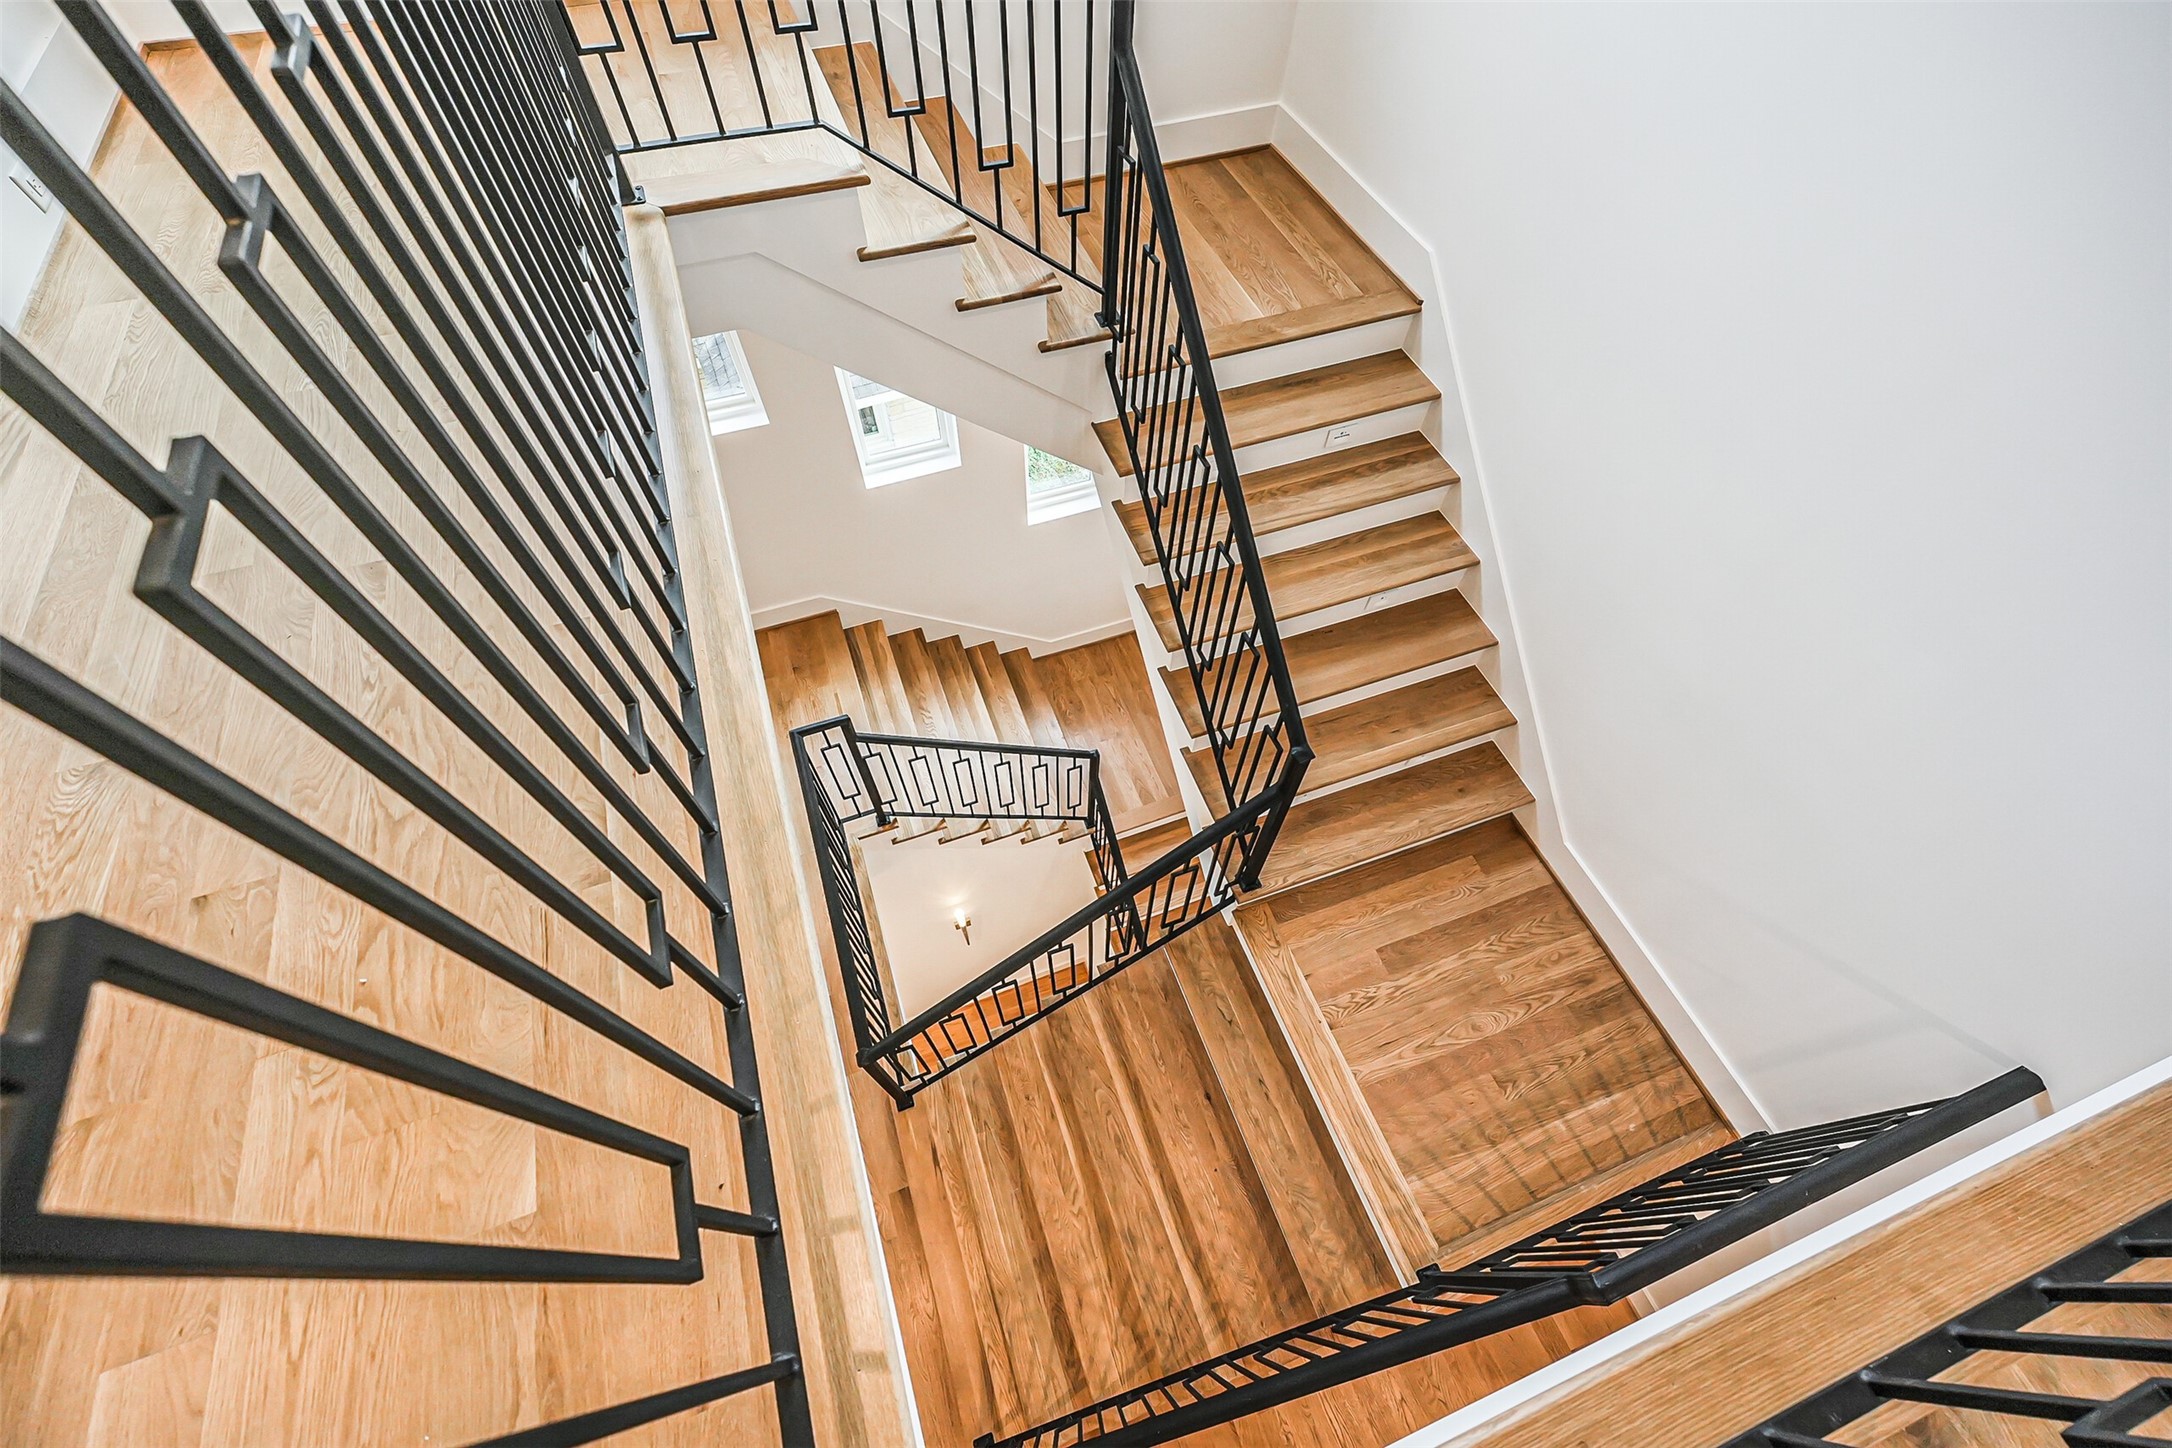 Images of the stair case from a similar home built by the same builder in 2023.